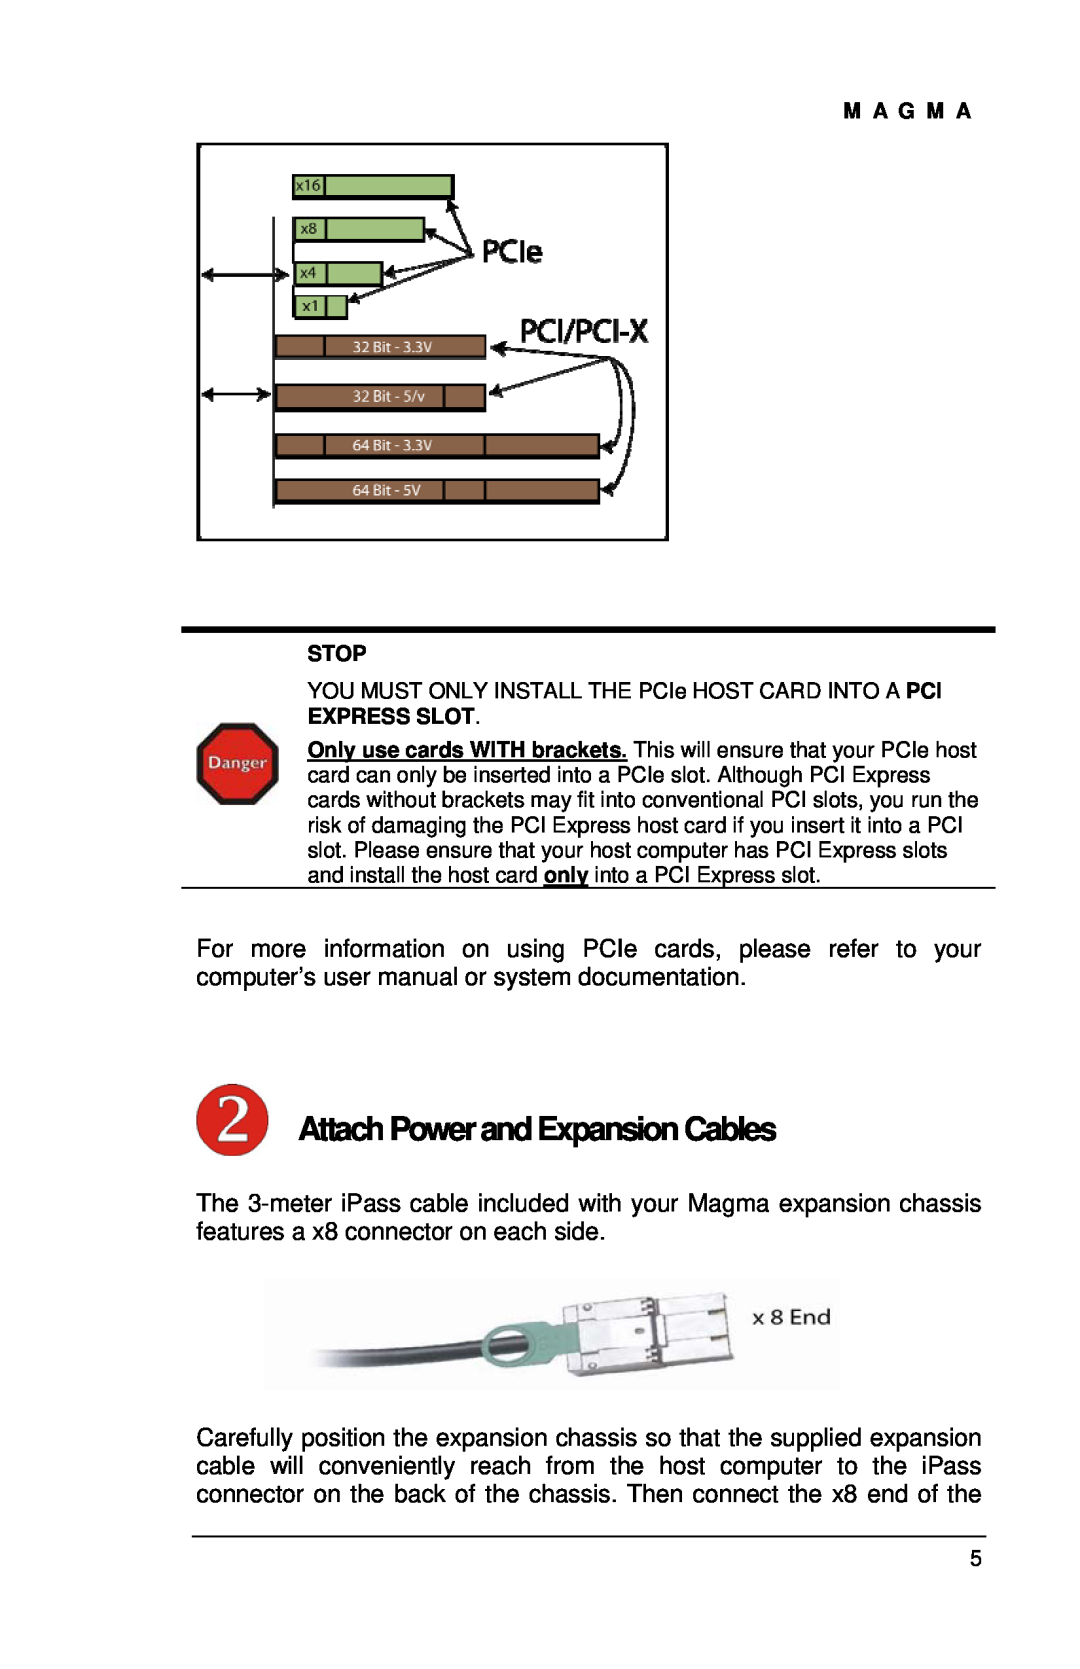 Magma EB7R-x8, EBU, EB7-x8 user manual Attach Power and Expansion Cables, M A G M A Stop 